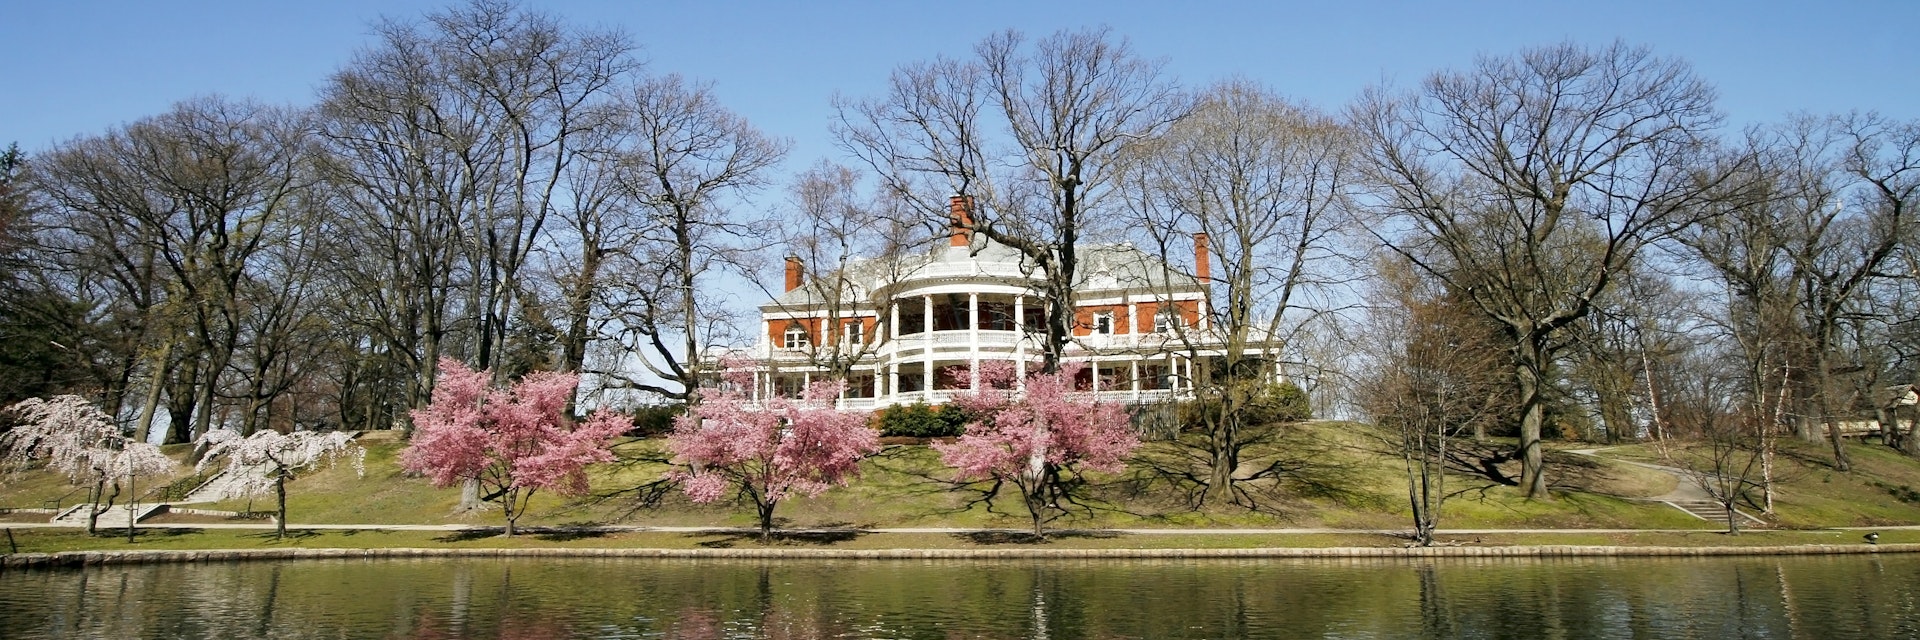 beautiful landscape with Casino in Roger Williams Park, Providence, Rhode Island; Shutterstock ID 11691217; Your name (First / Last): Lauren Keith; GL account no.: 65050; Netsuite department name: Content Asset; Full Product or Project name including edition: Guides Project Eastern USA